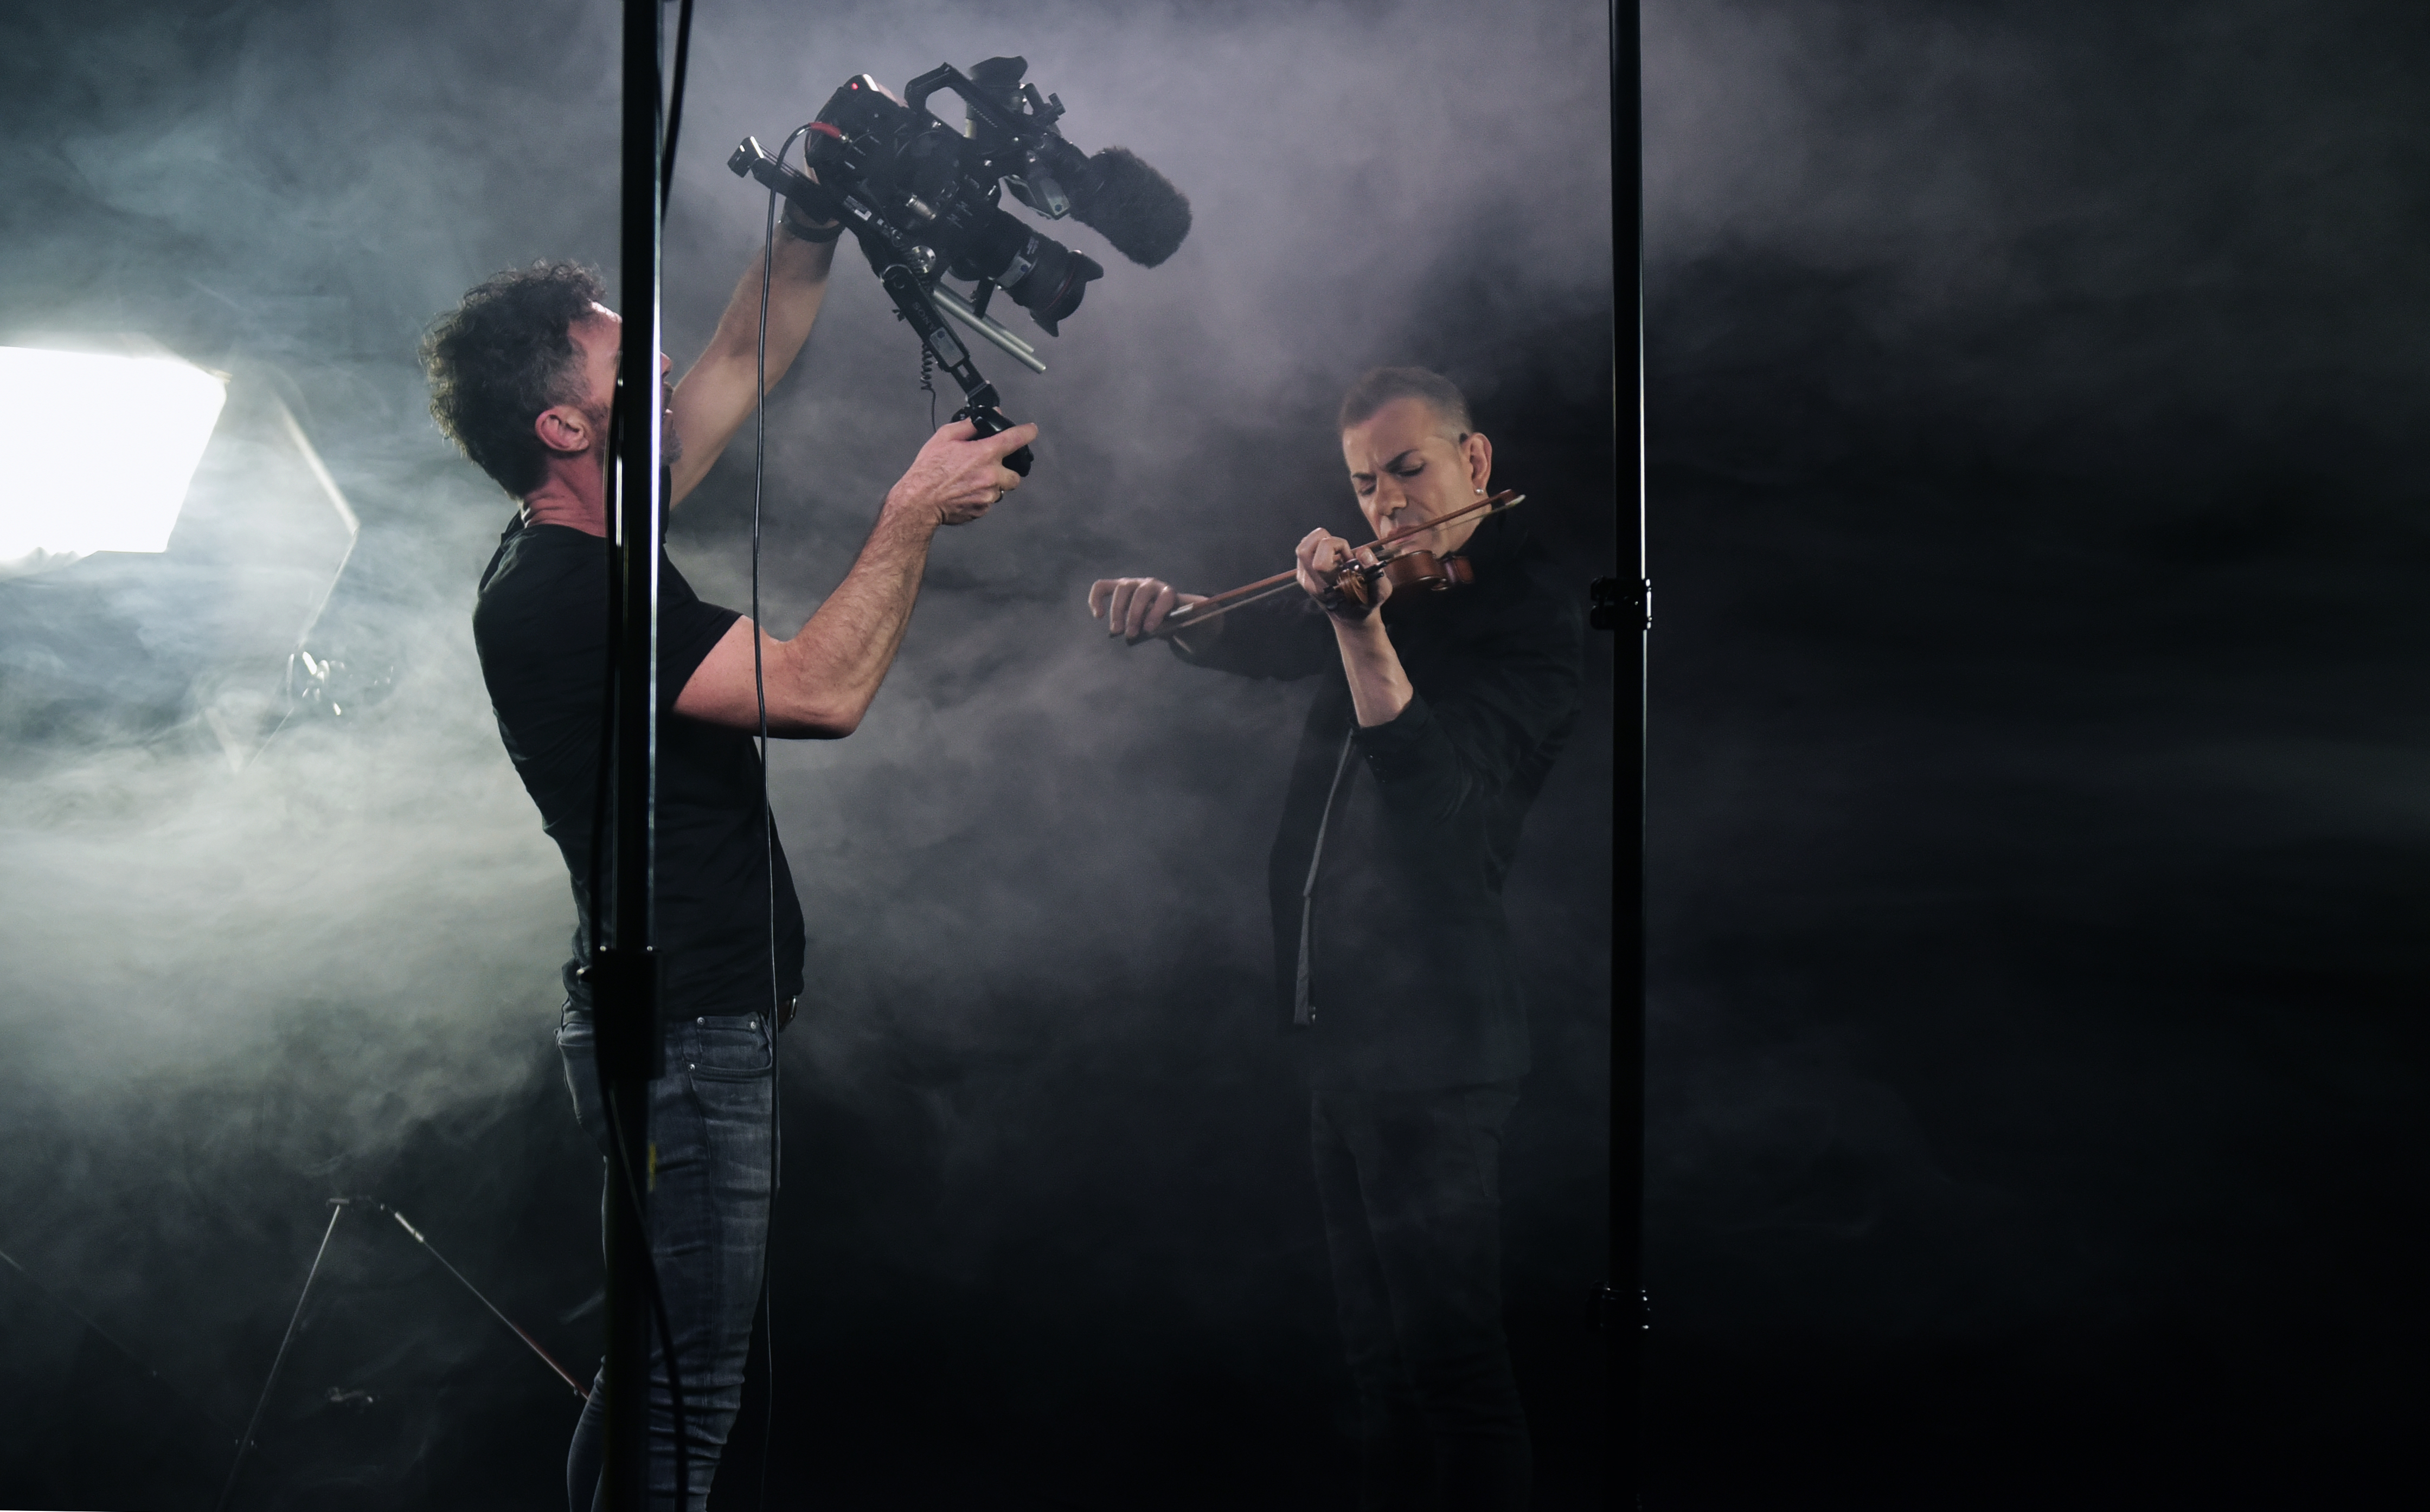 violin performer being recorded by a cameraman on a studio